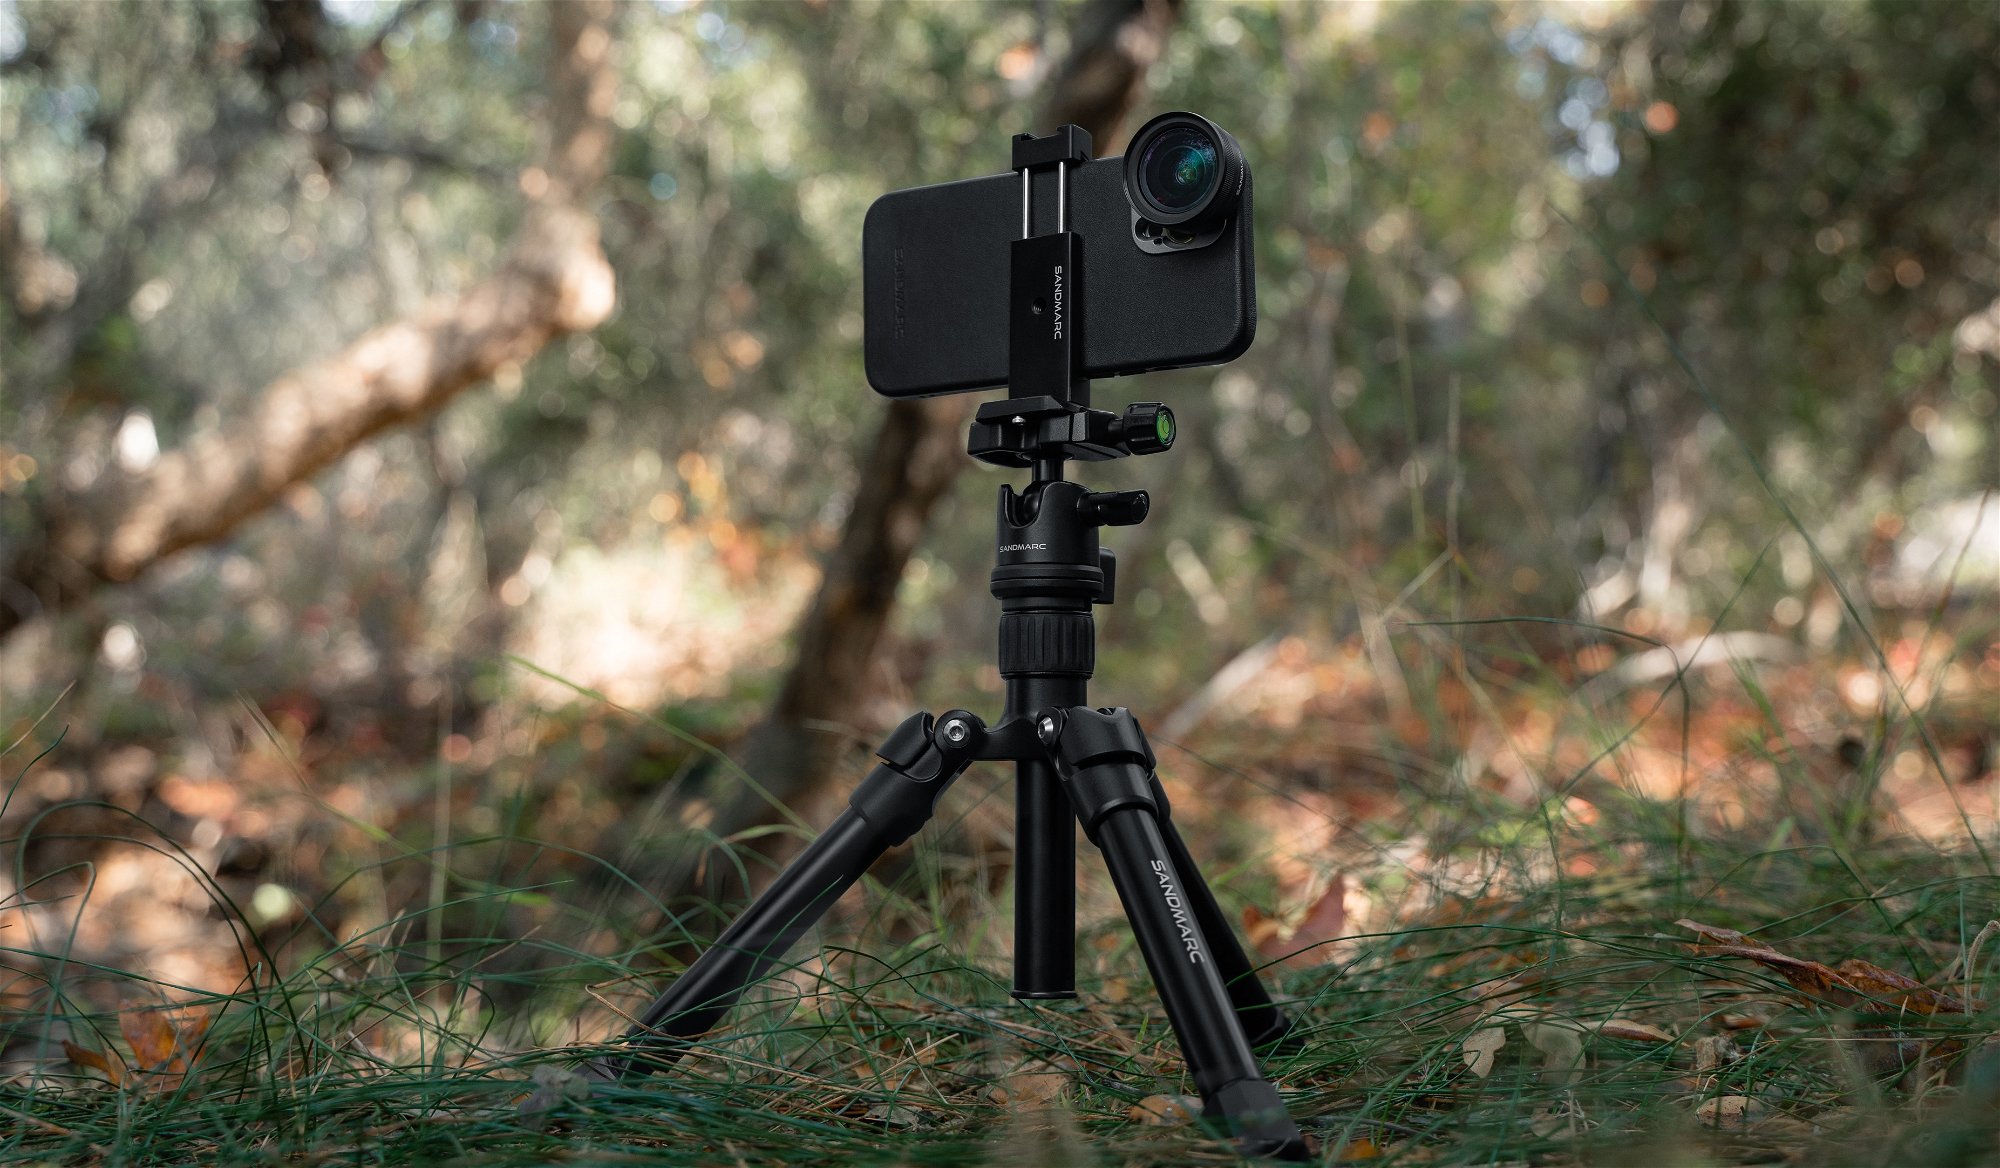 Sandmarc's New Carbon Fiber Tripod is Made Specifically for iPhone